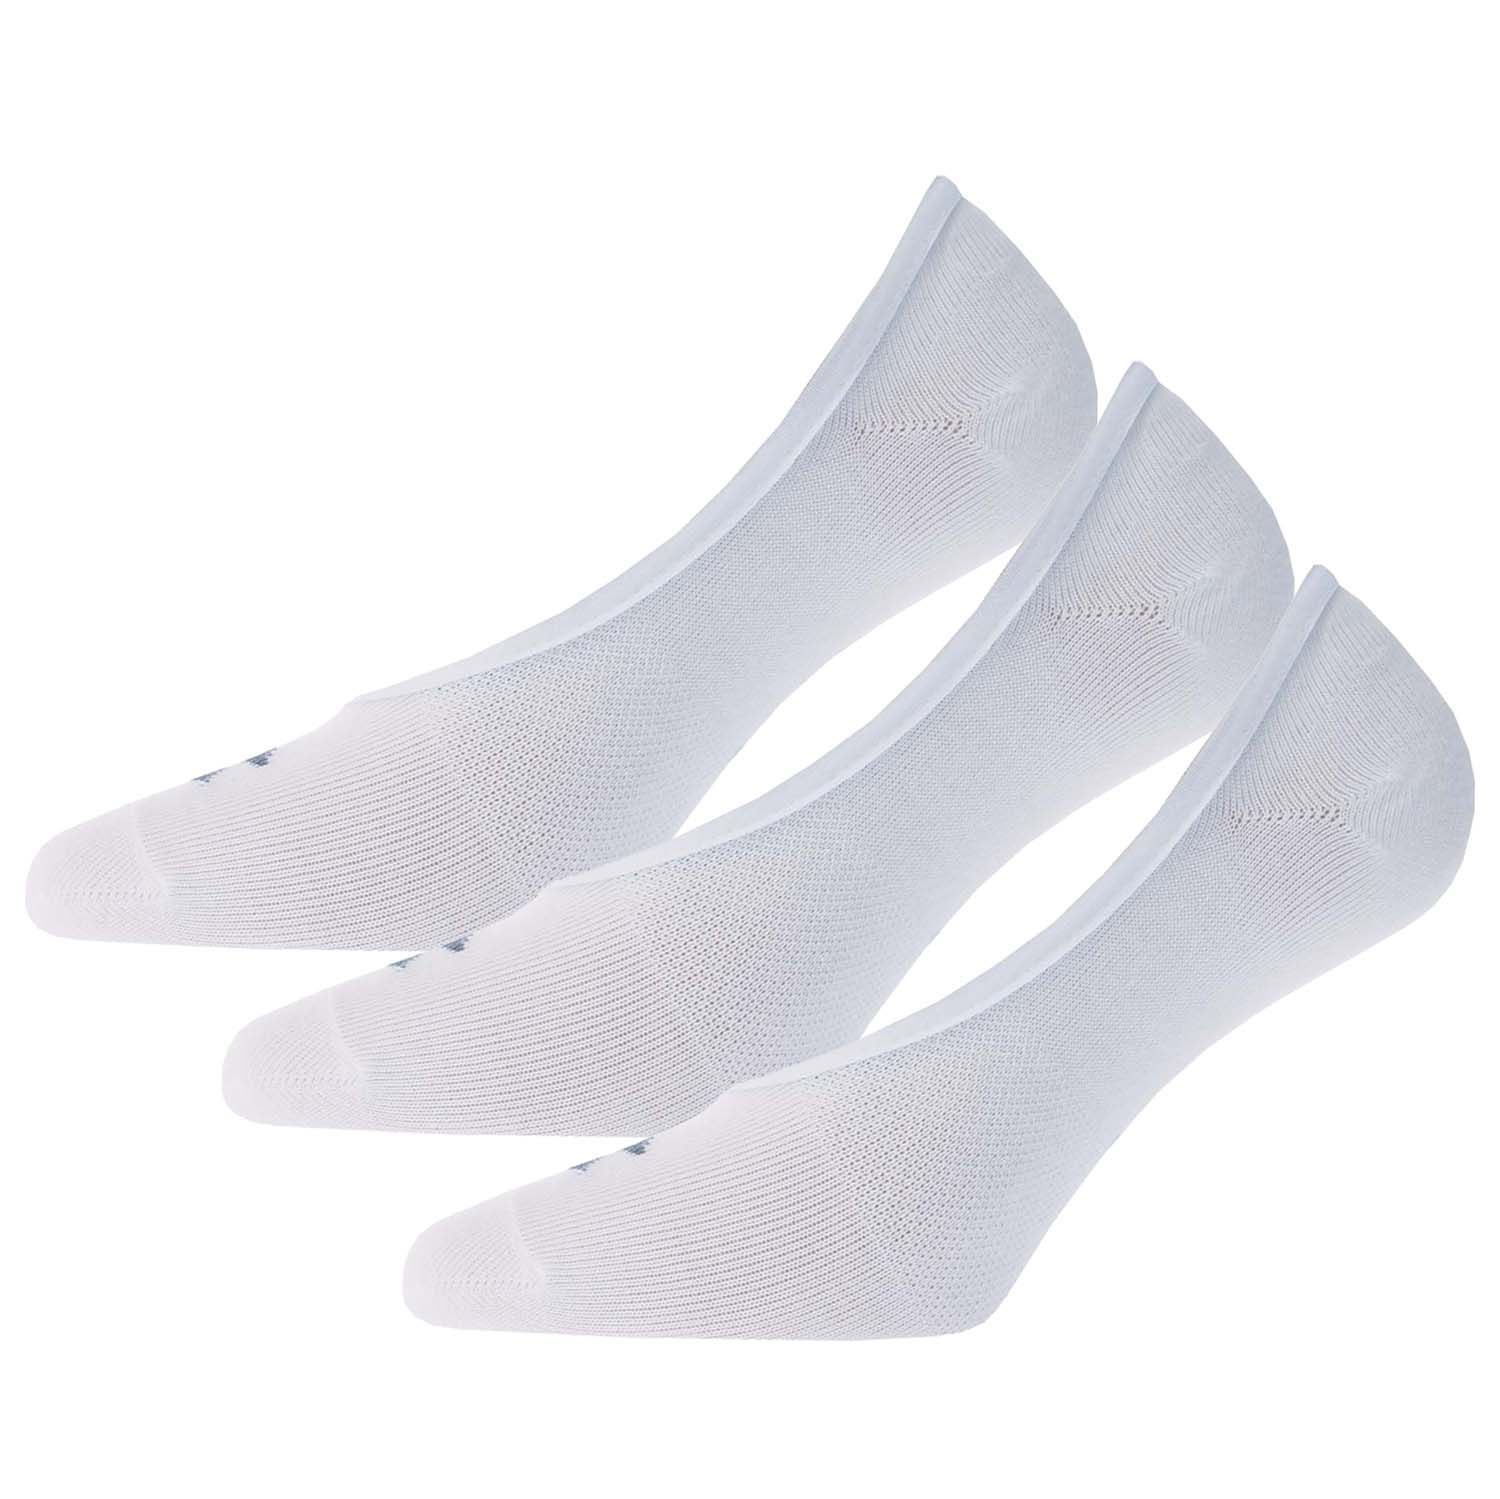 Under Armour Essential 3- Pack Lolo Liner Socks in white.- Three pairs per pack. - Lightweight socks are soft & comfortable.- No-slip silicone heel grip & elastic trim binding help keep your socks in place.- Ultra-low design can be worn with even our lowest cut training shoes.- Material wicks sweat and dries really fast.- Anti-odor technology helps prevent odor in the sock.- Ultra-thin & light construction for a barely there feel.- 91% Polyester  6% Nylon  3% Elastane.- Ref: 1361148400